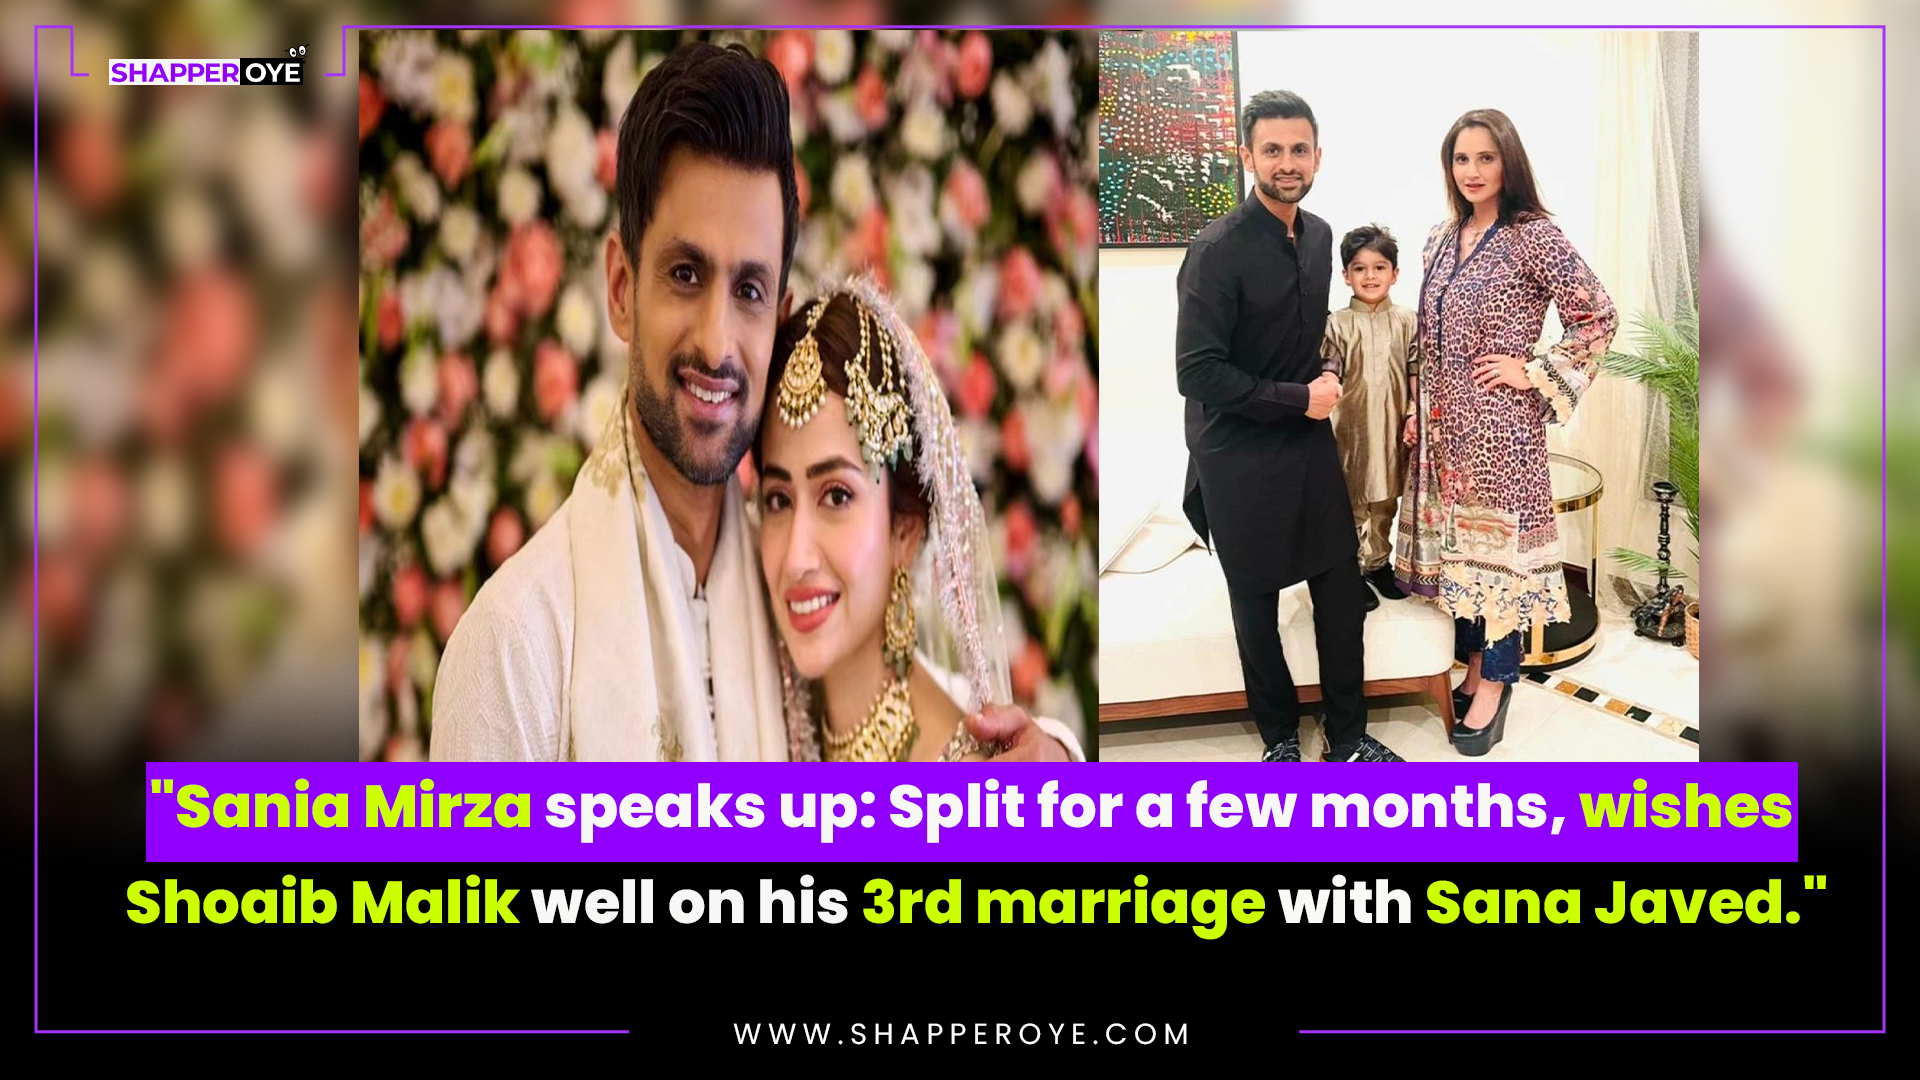 "Sania Mirza speaks up: Split for a few months, wishes Shoaib Malik well on his 3rd marriage with Sana Javed."